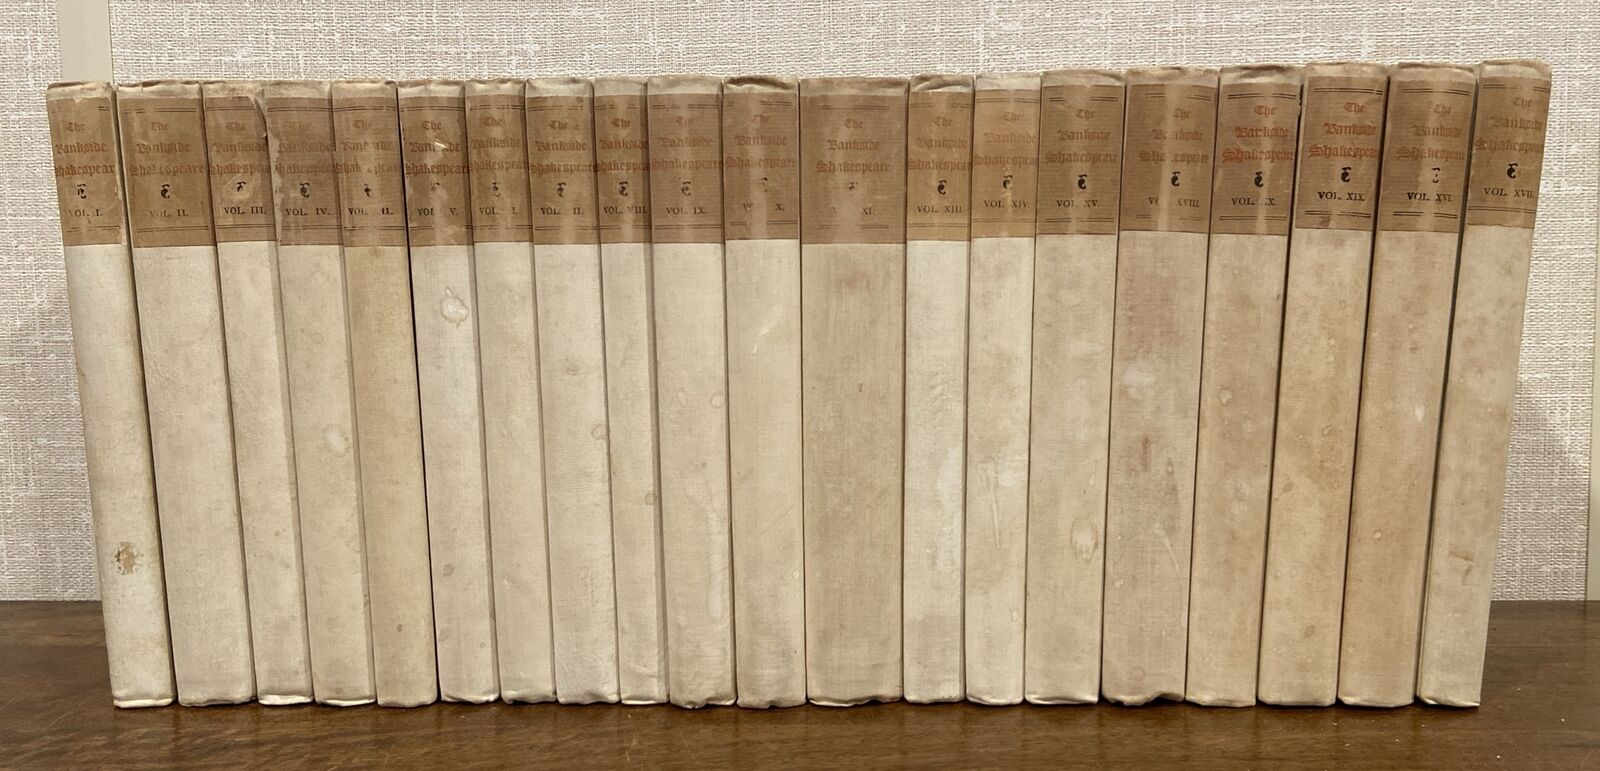 Early 1880s Set Of The Bankside Shakespeare Books - 20 Volumes - Shakespeare